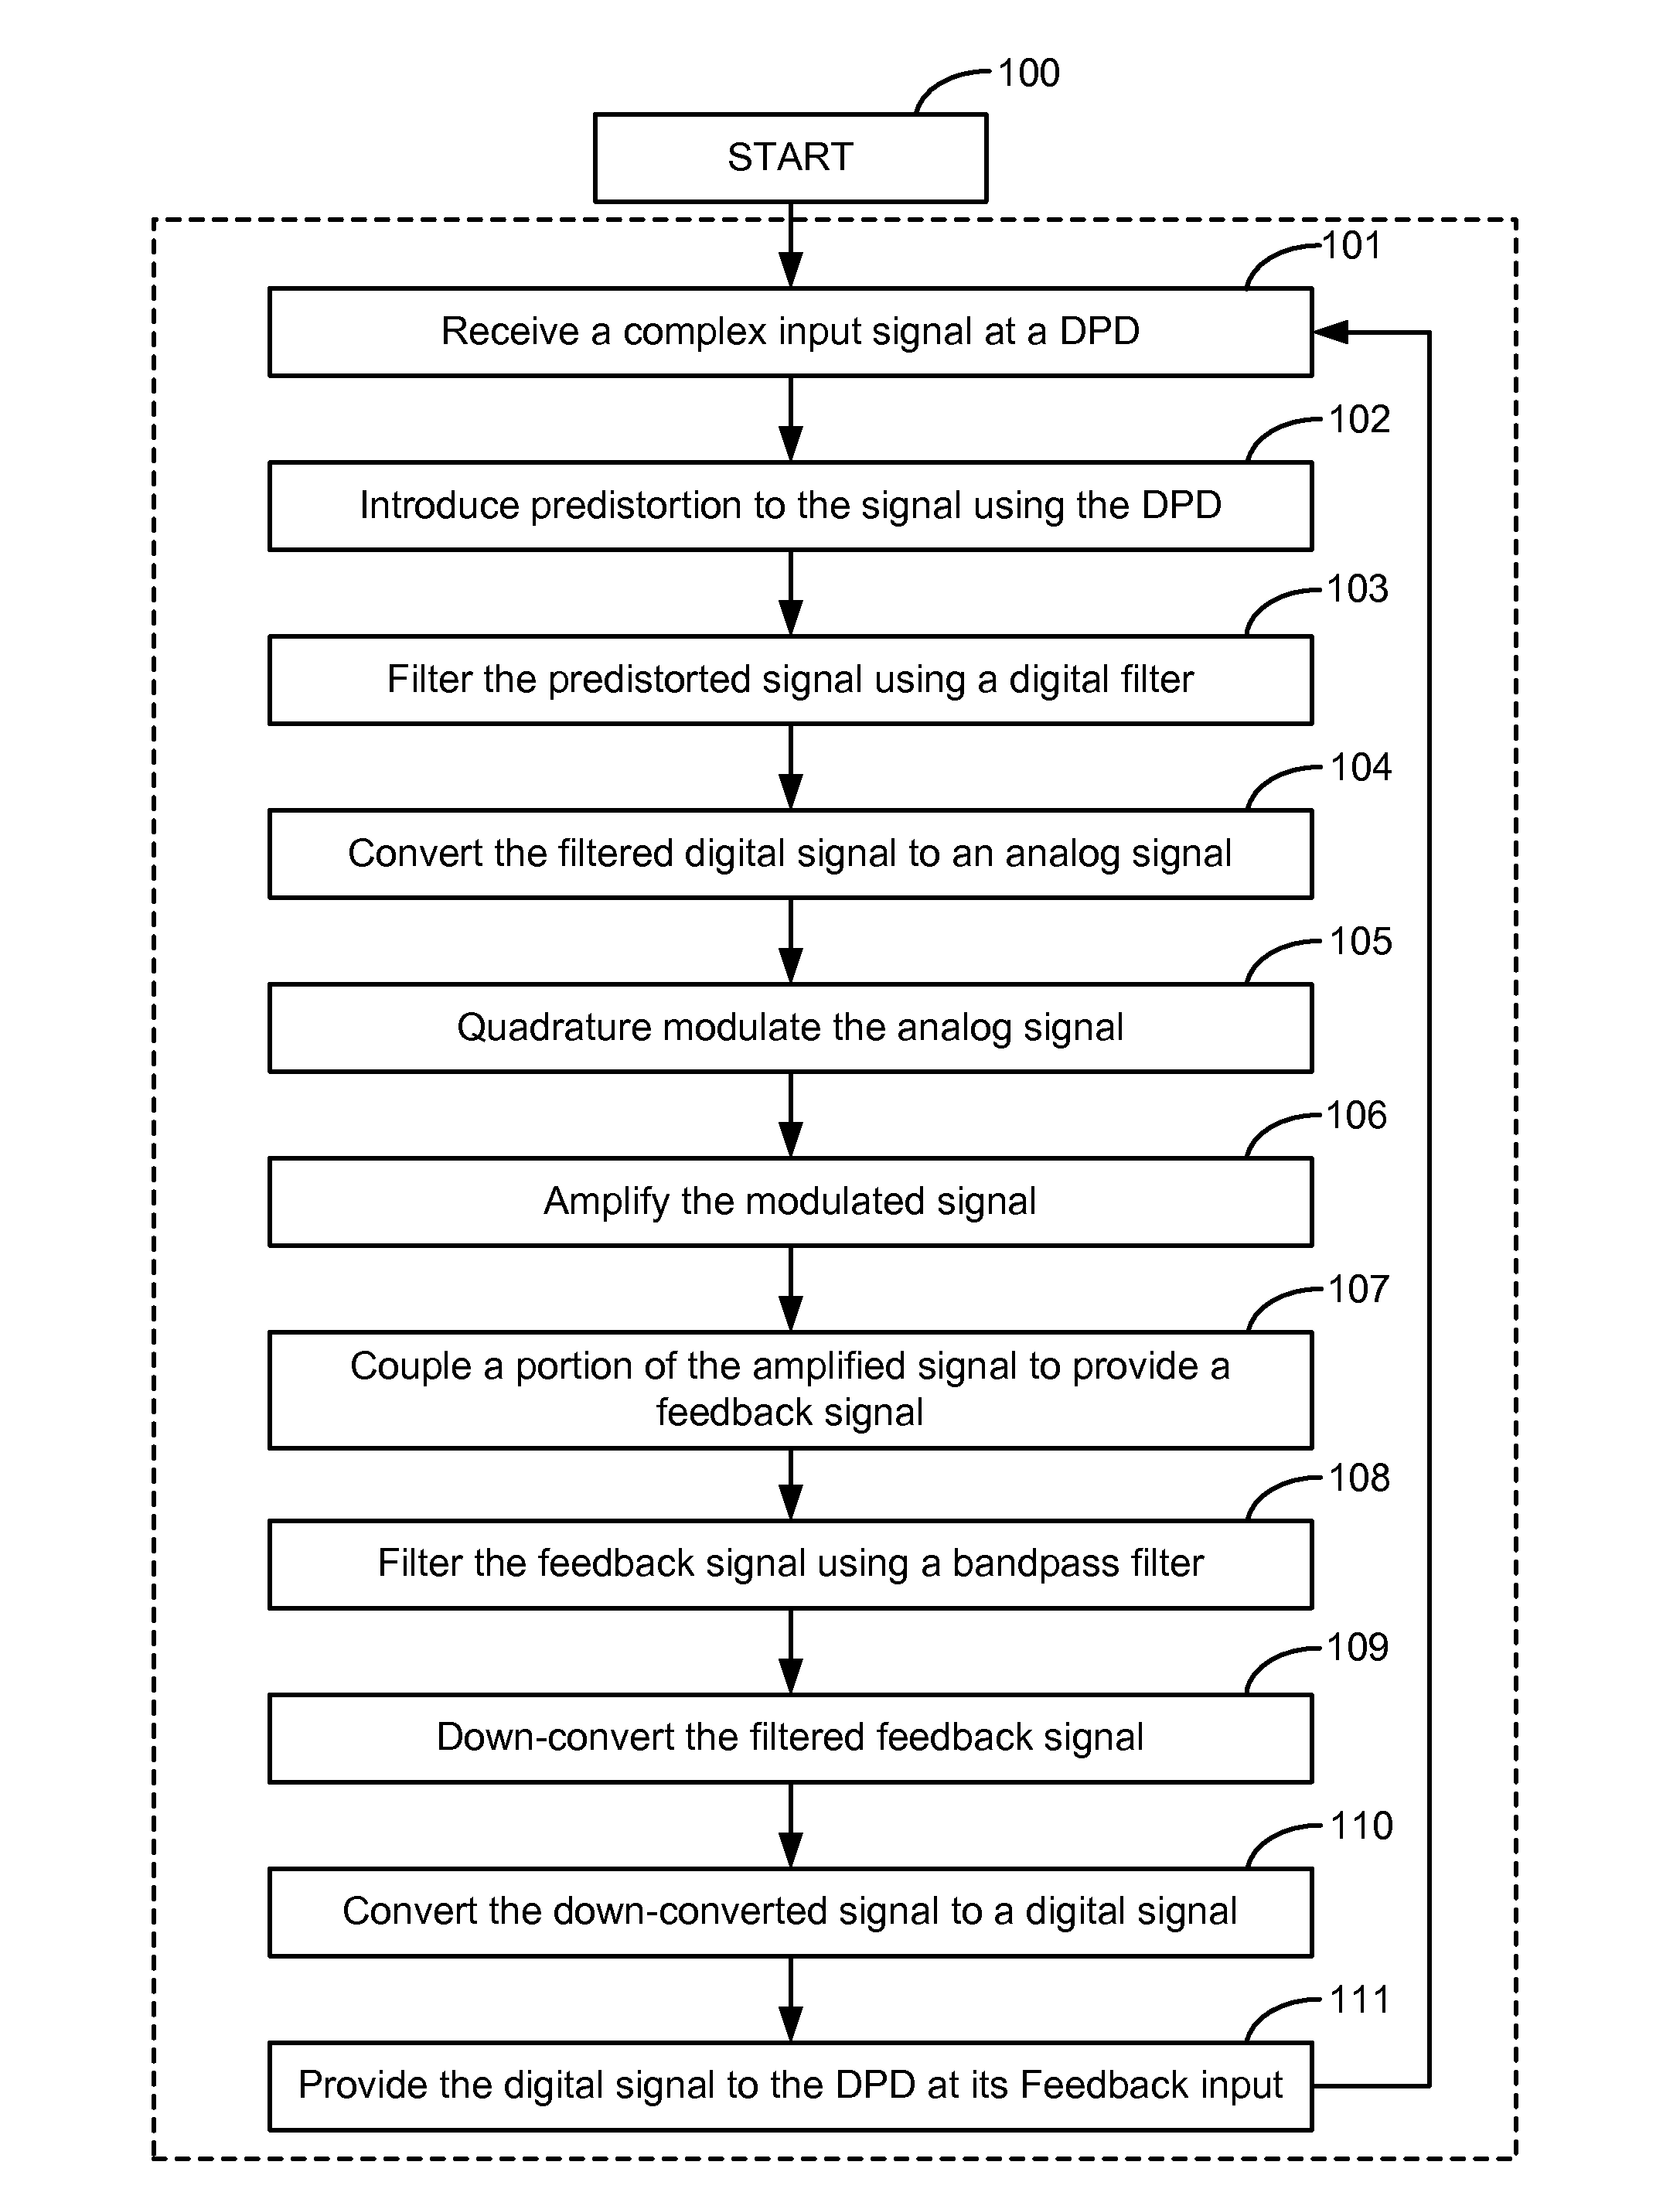 Wide bandwidth digital predistortion system with reduced sampling rate